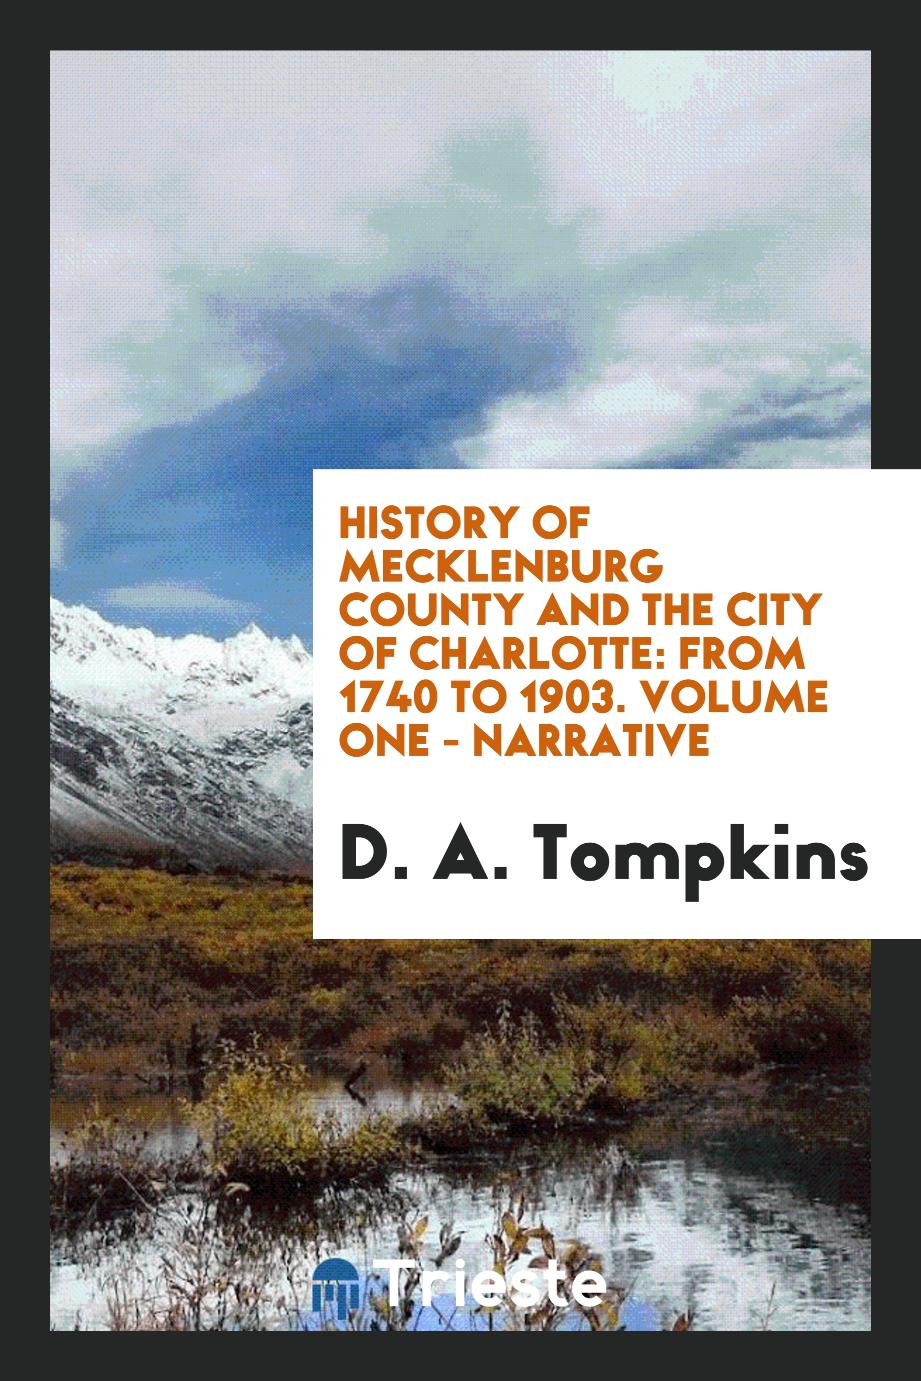 History of Mecklenburg County and the City of Charlotte: From 1740 to 1903. Volume One - Narrative